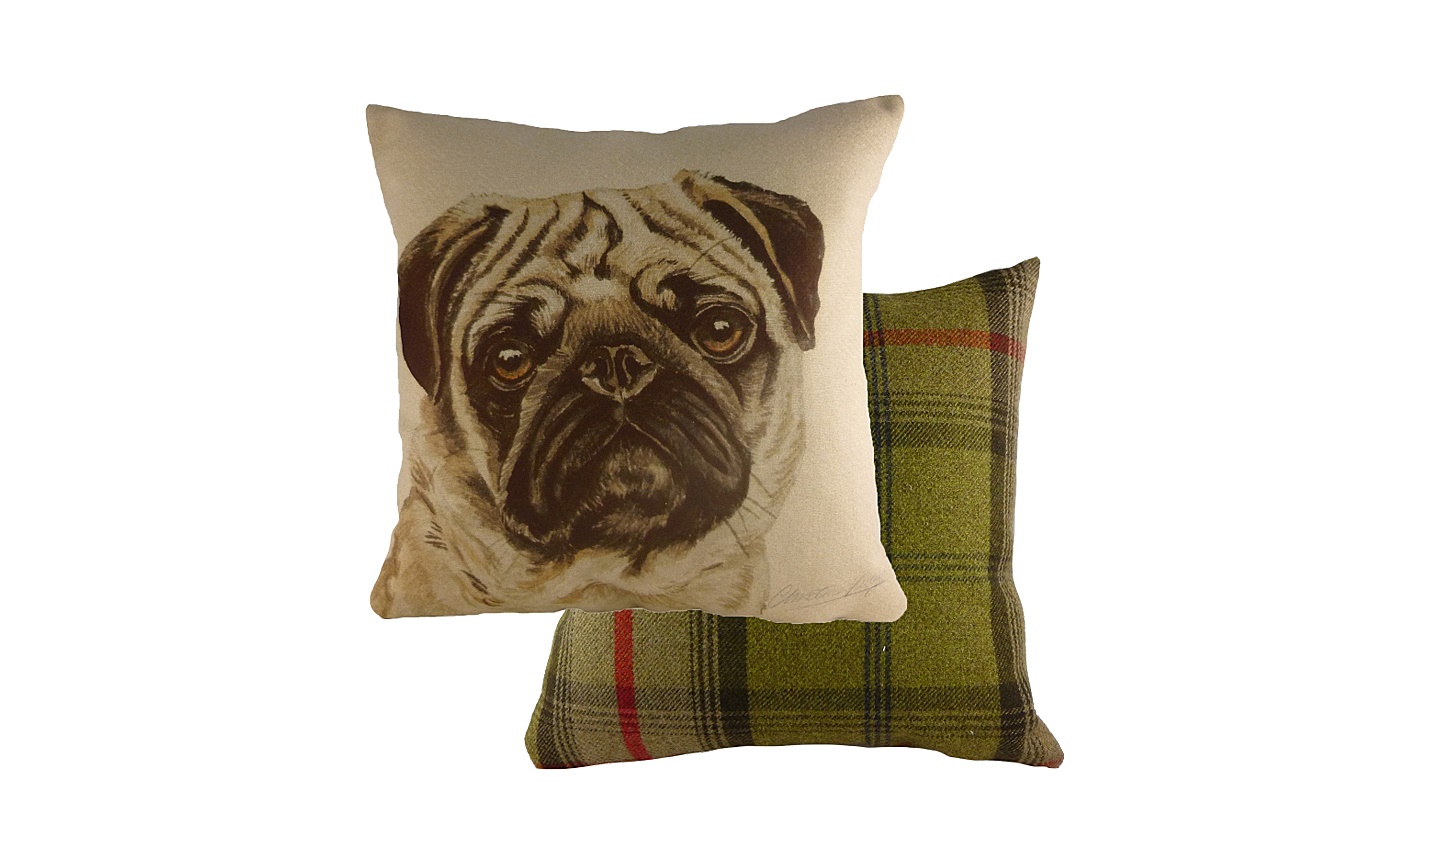    Waggydogs Pug - DG Home - DG Home <br> &quot;WAGGYDOGS PUG&quot;       . &amp;nbsp;    ,      .    , ,     .          !        .<br><br>Material: <br>Length : 43<br>Width : 43<br>Height : 6